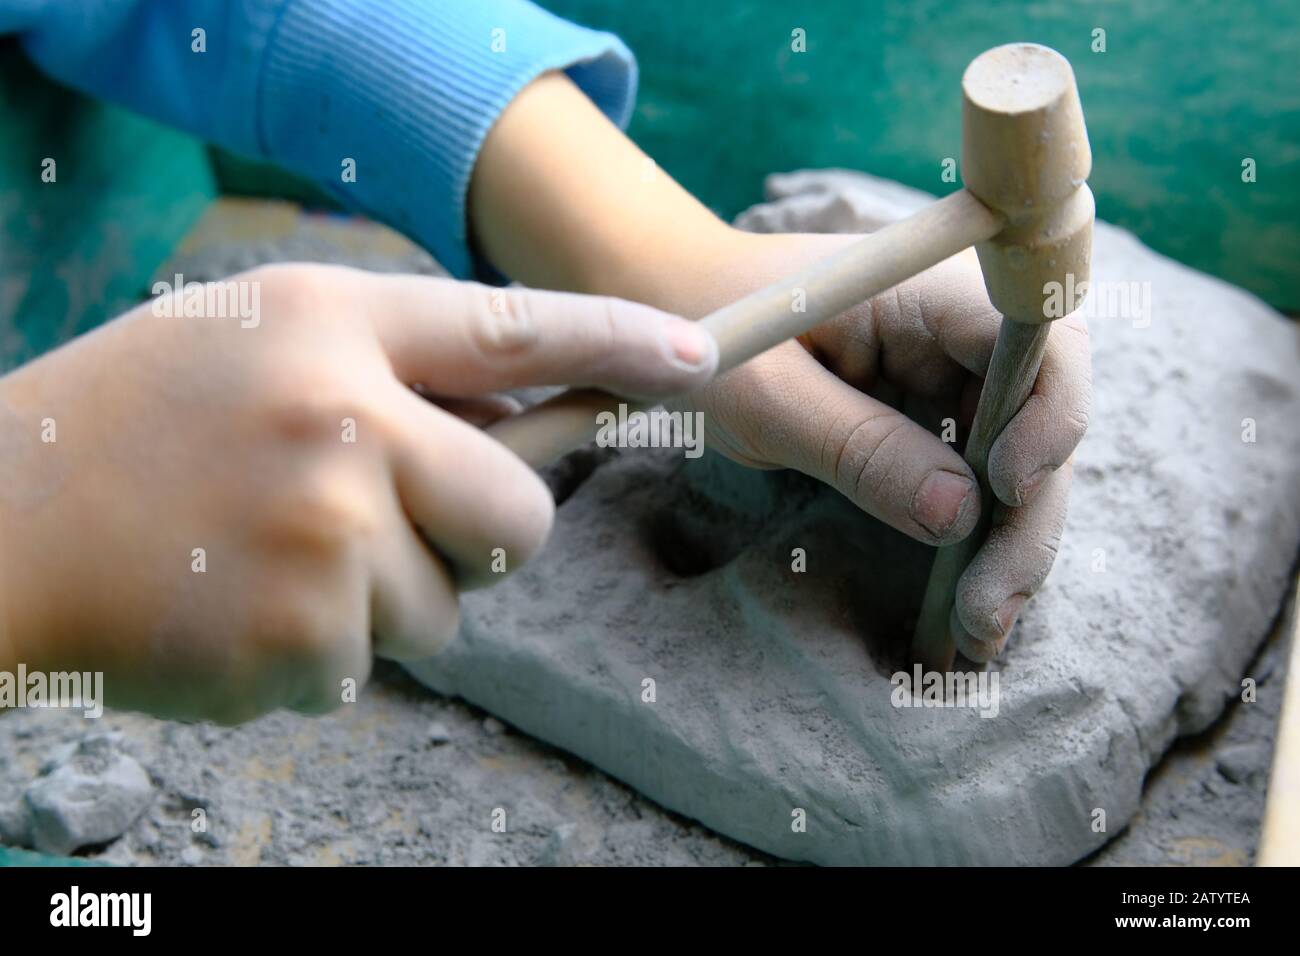 Child playing fossil, mineral and treasure excavation game. Child is using tools, such as a hammer. Stock Photo